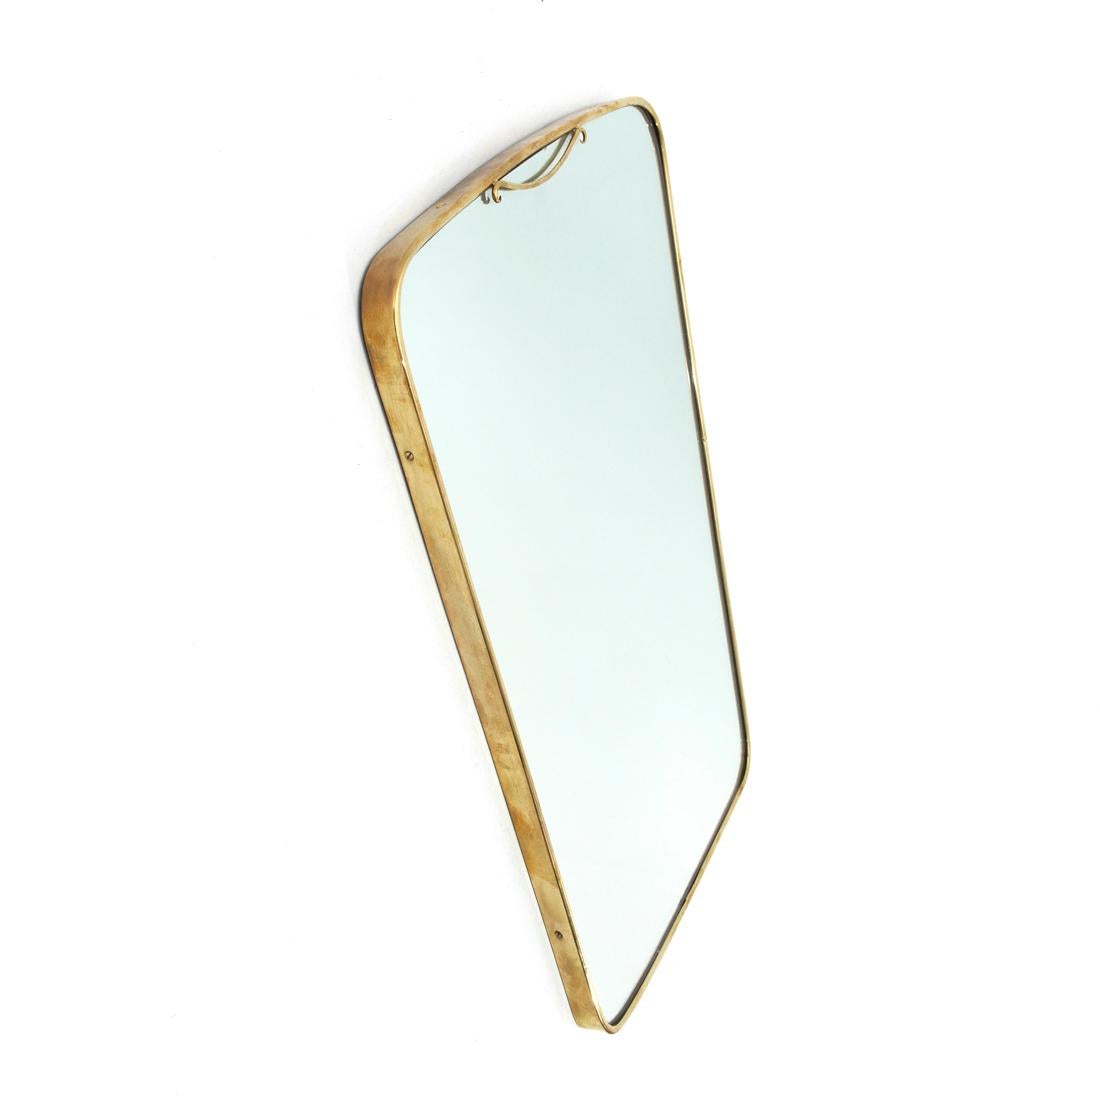 Italian manufacture mirror produced in the 1950s.
Wooden frame, mirrored glass and brass frame.
Good general conditions, some signs due to normal use over time.

Dimensions: Length 45 cm, depth 2.5 cm, height 67 cm.